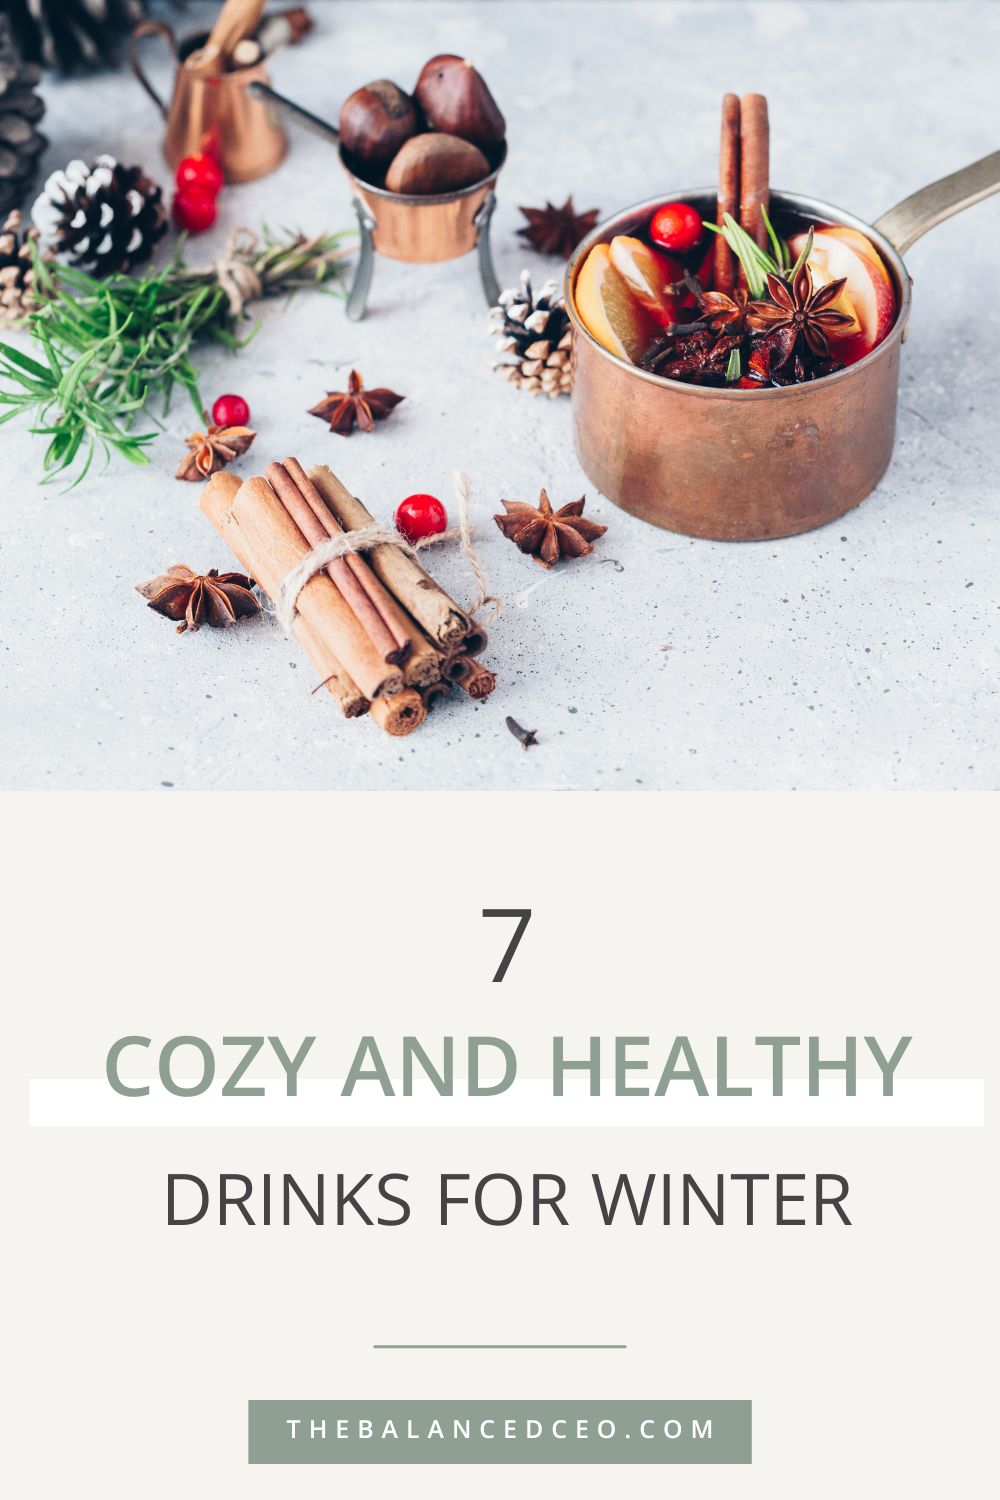 7 Cozy and Healthy Drinks for the Winter